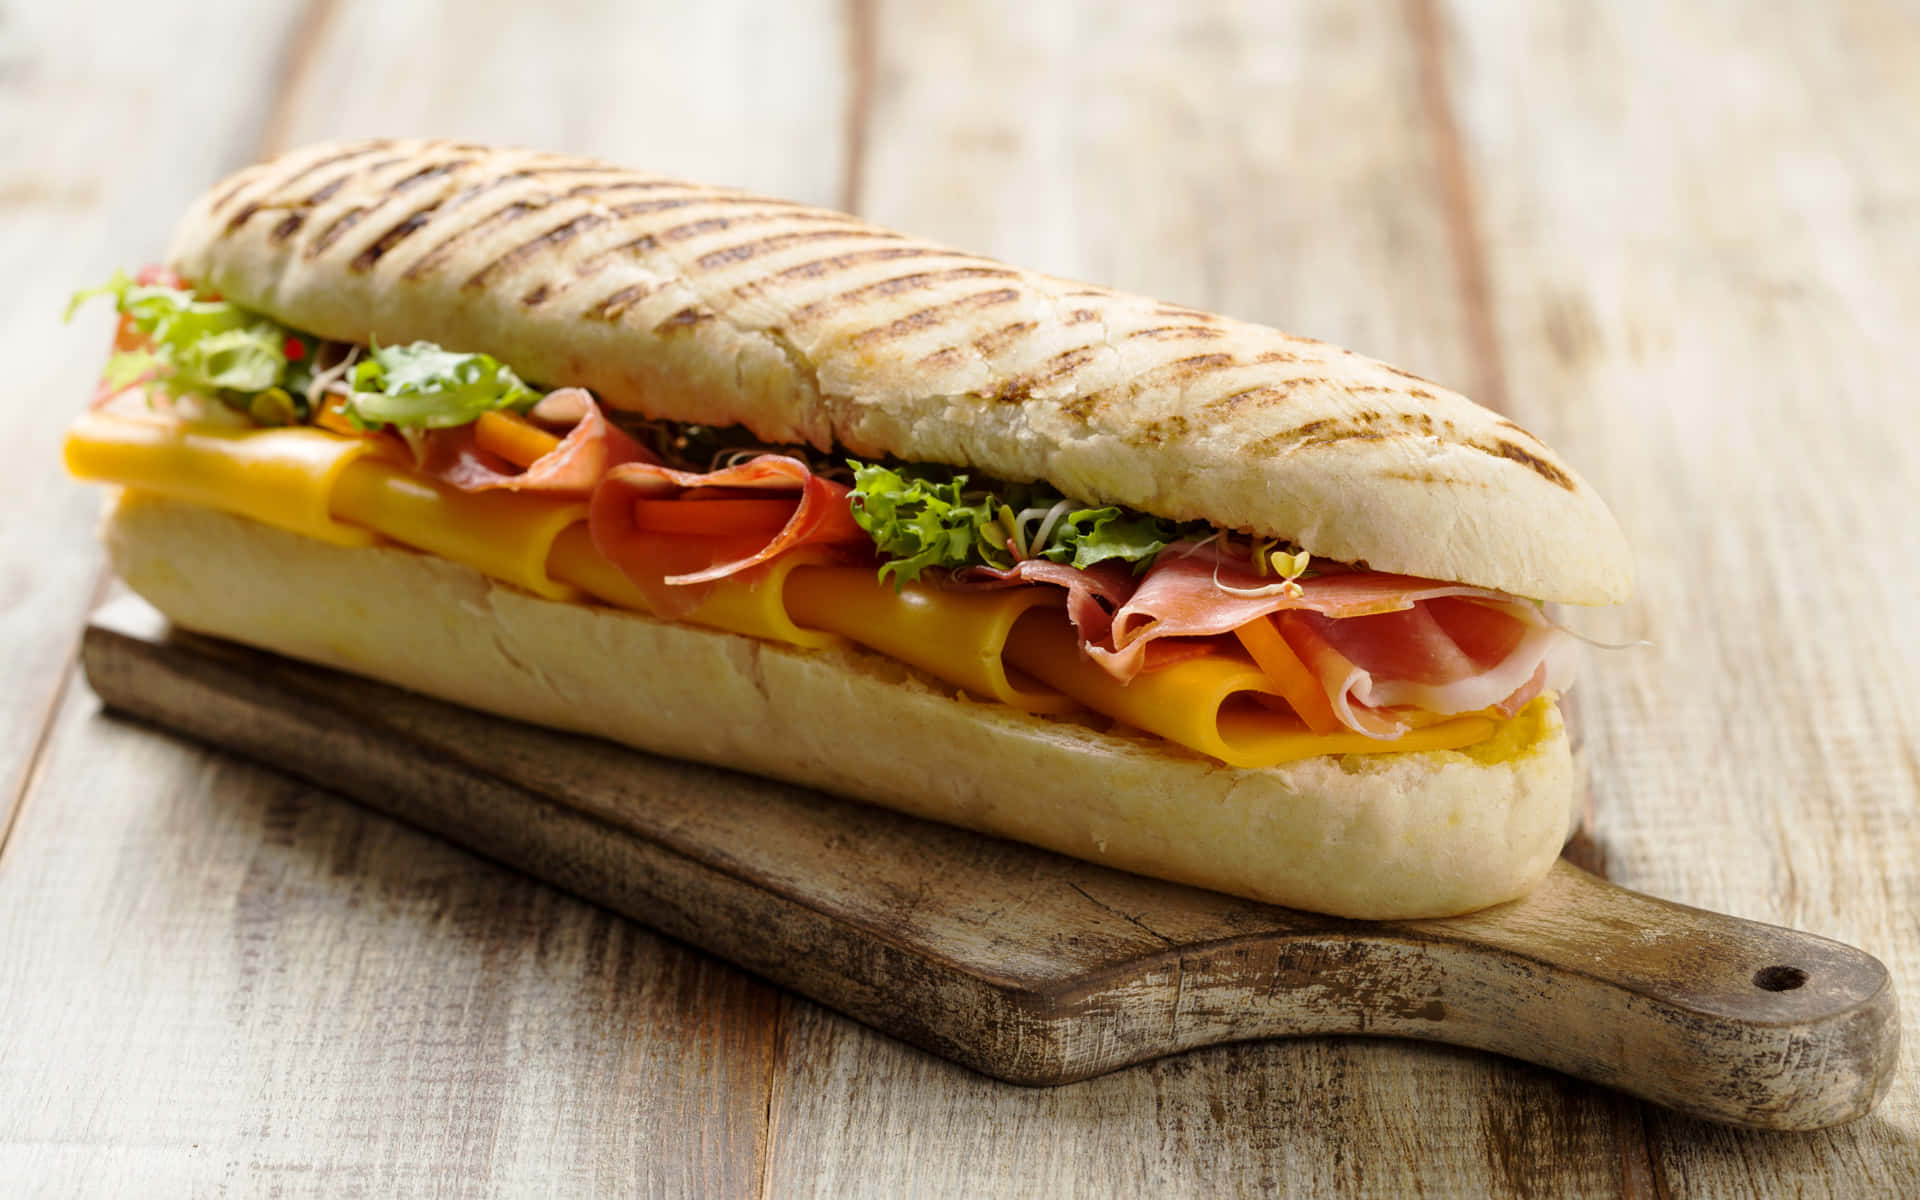 A delectable sandwich filled with delicious toppings.